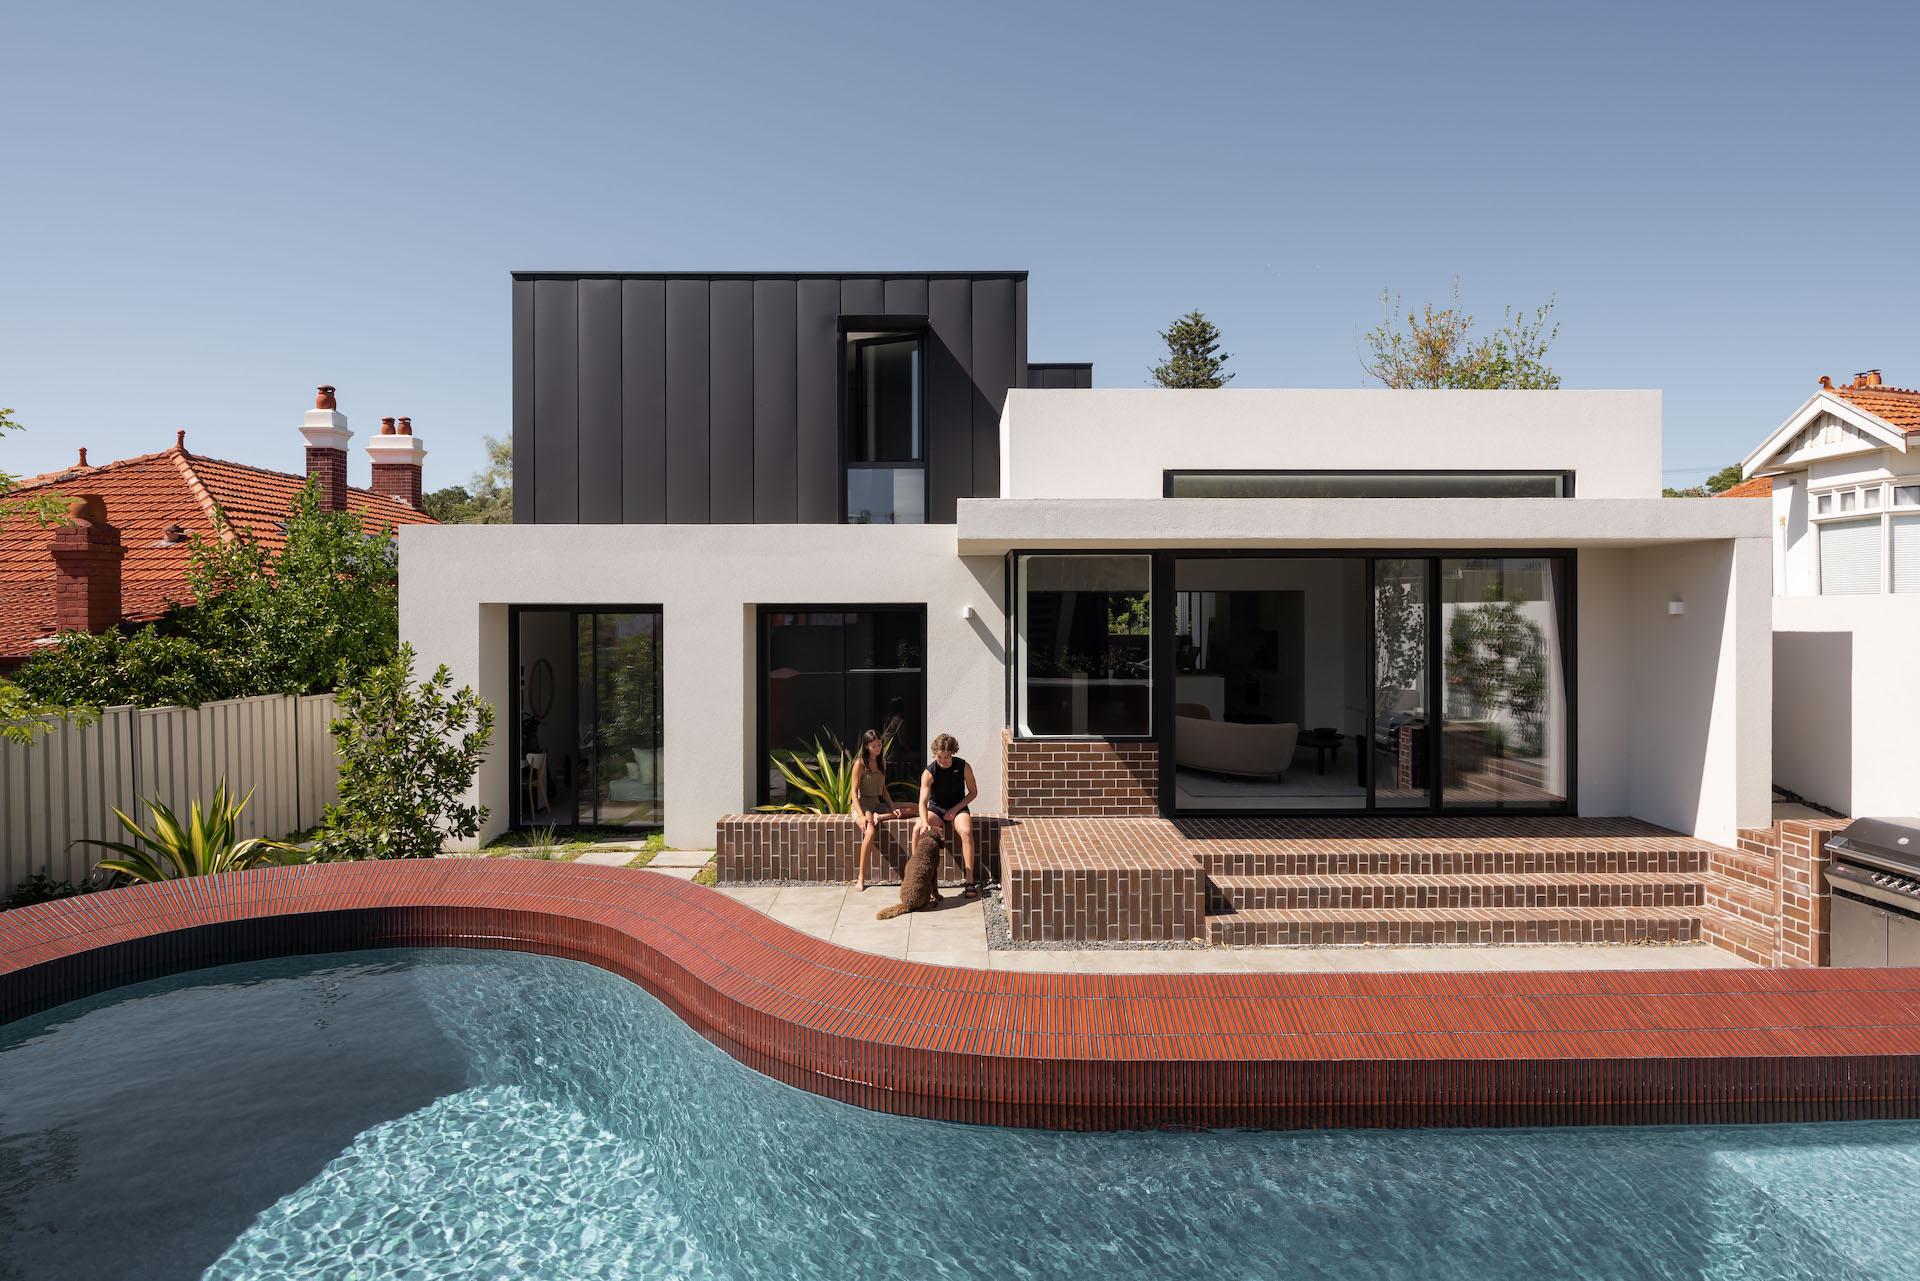 Inside a Spacious Family House in Western Australia’s Mount Lawley